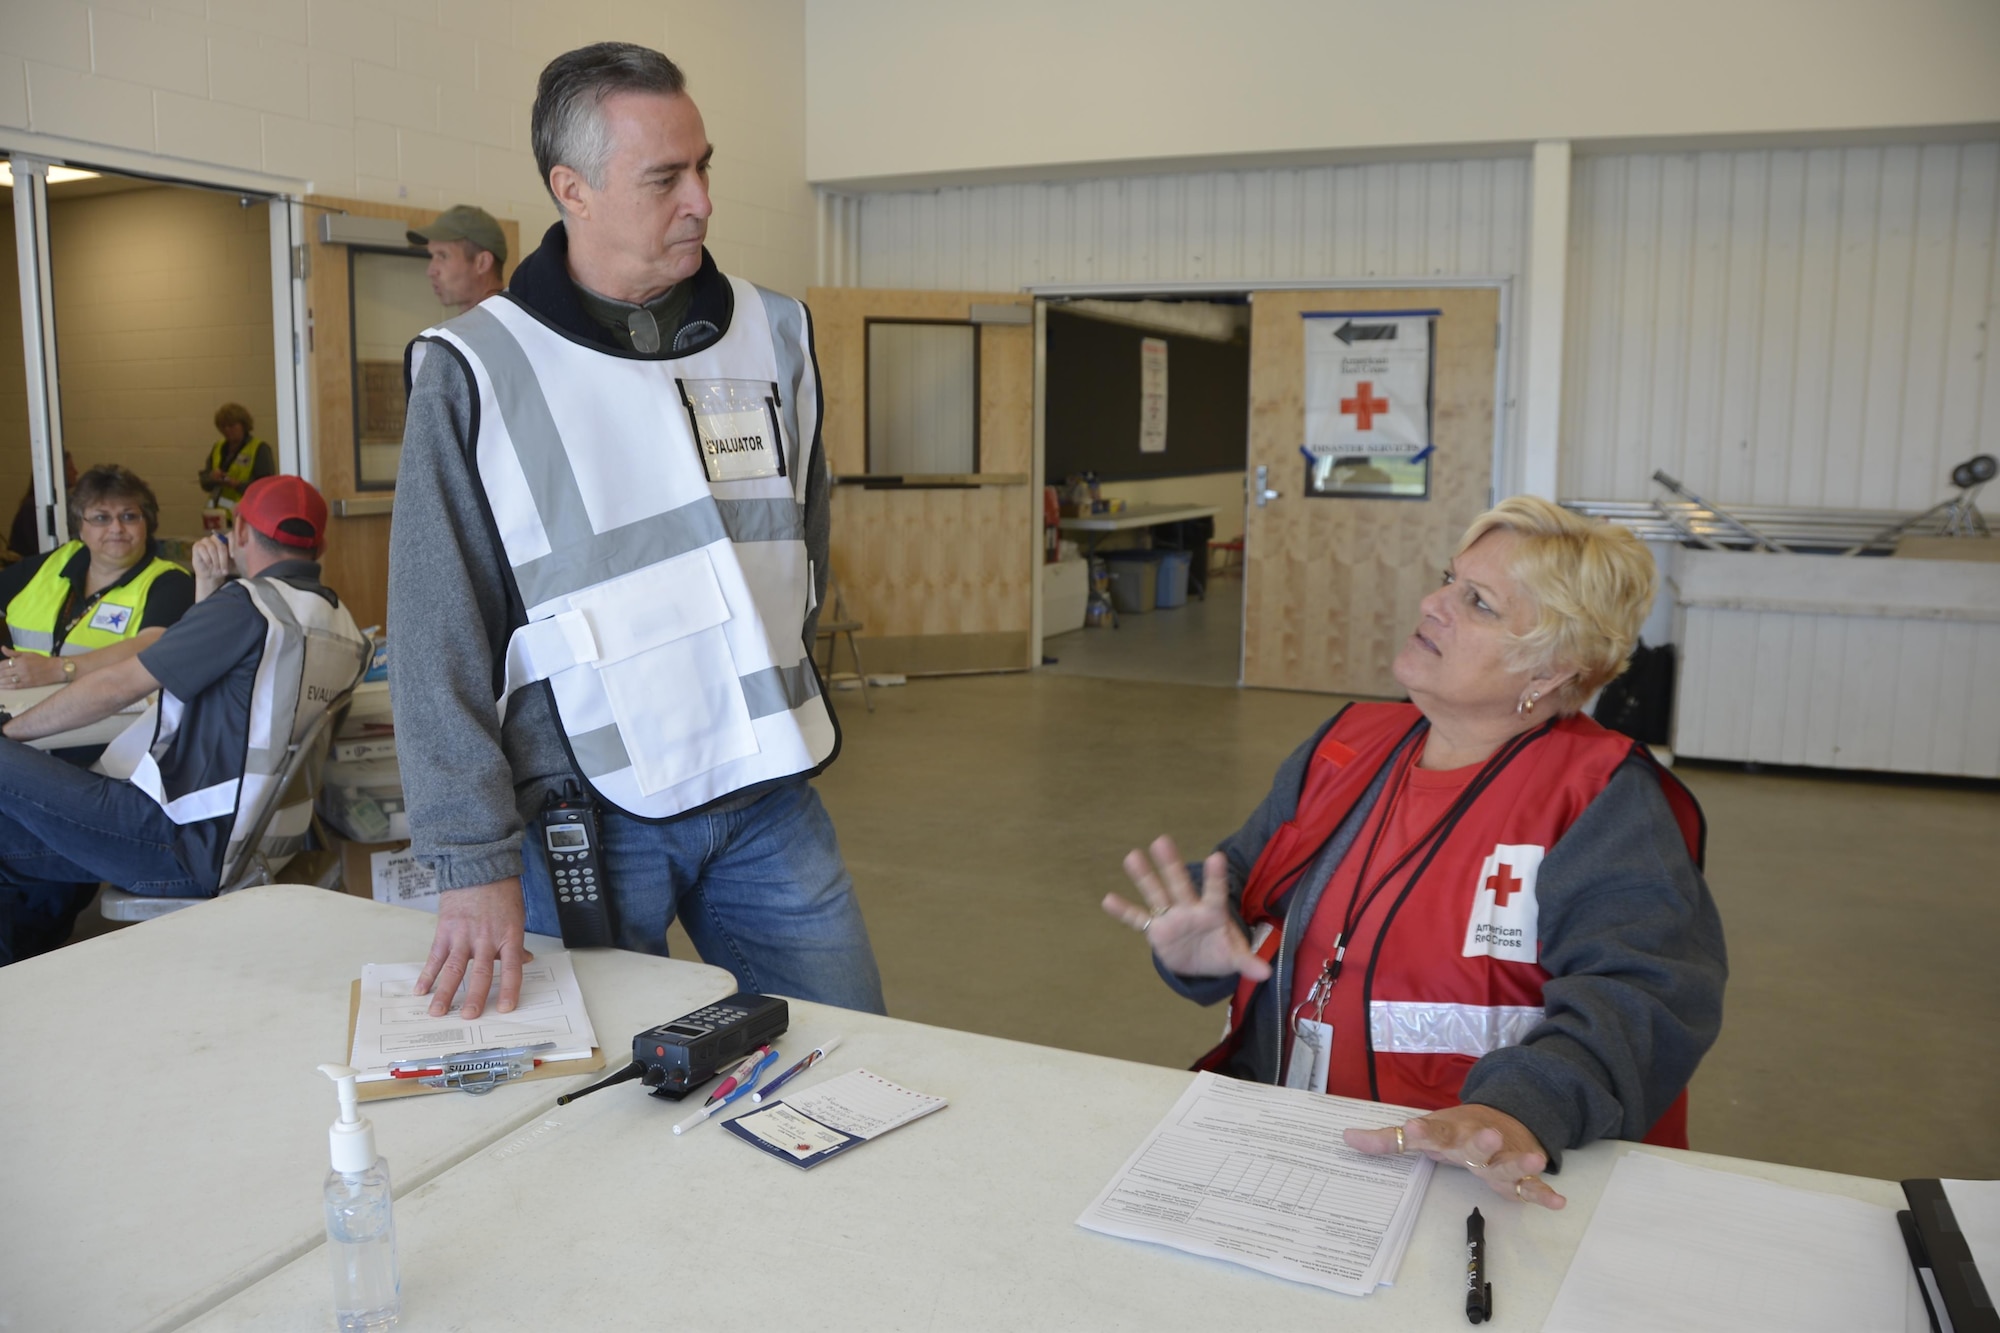 John Bender, Air Forces Northern Installation & Mission Support Division Readiness Section Chief, talks with Janis Pennell of the American Red Cross during an animal-related  disaster-response workshop at the Bay County Fairgrounds Feb. 28. Bender was an evaluator at the workshop. Hosted by the Florida State Agricultural Response Team and Bay County Emergency Services, the event brought together a wide variety of emergency-response agencies and focused on practicing providing disaster response assistance not only to people, but also their pets.